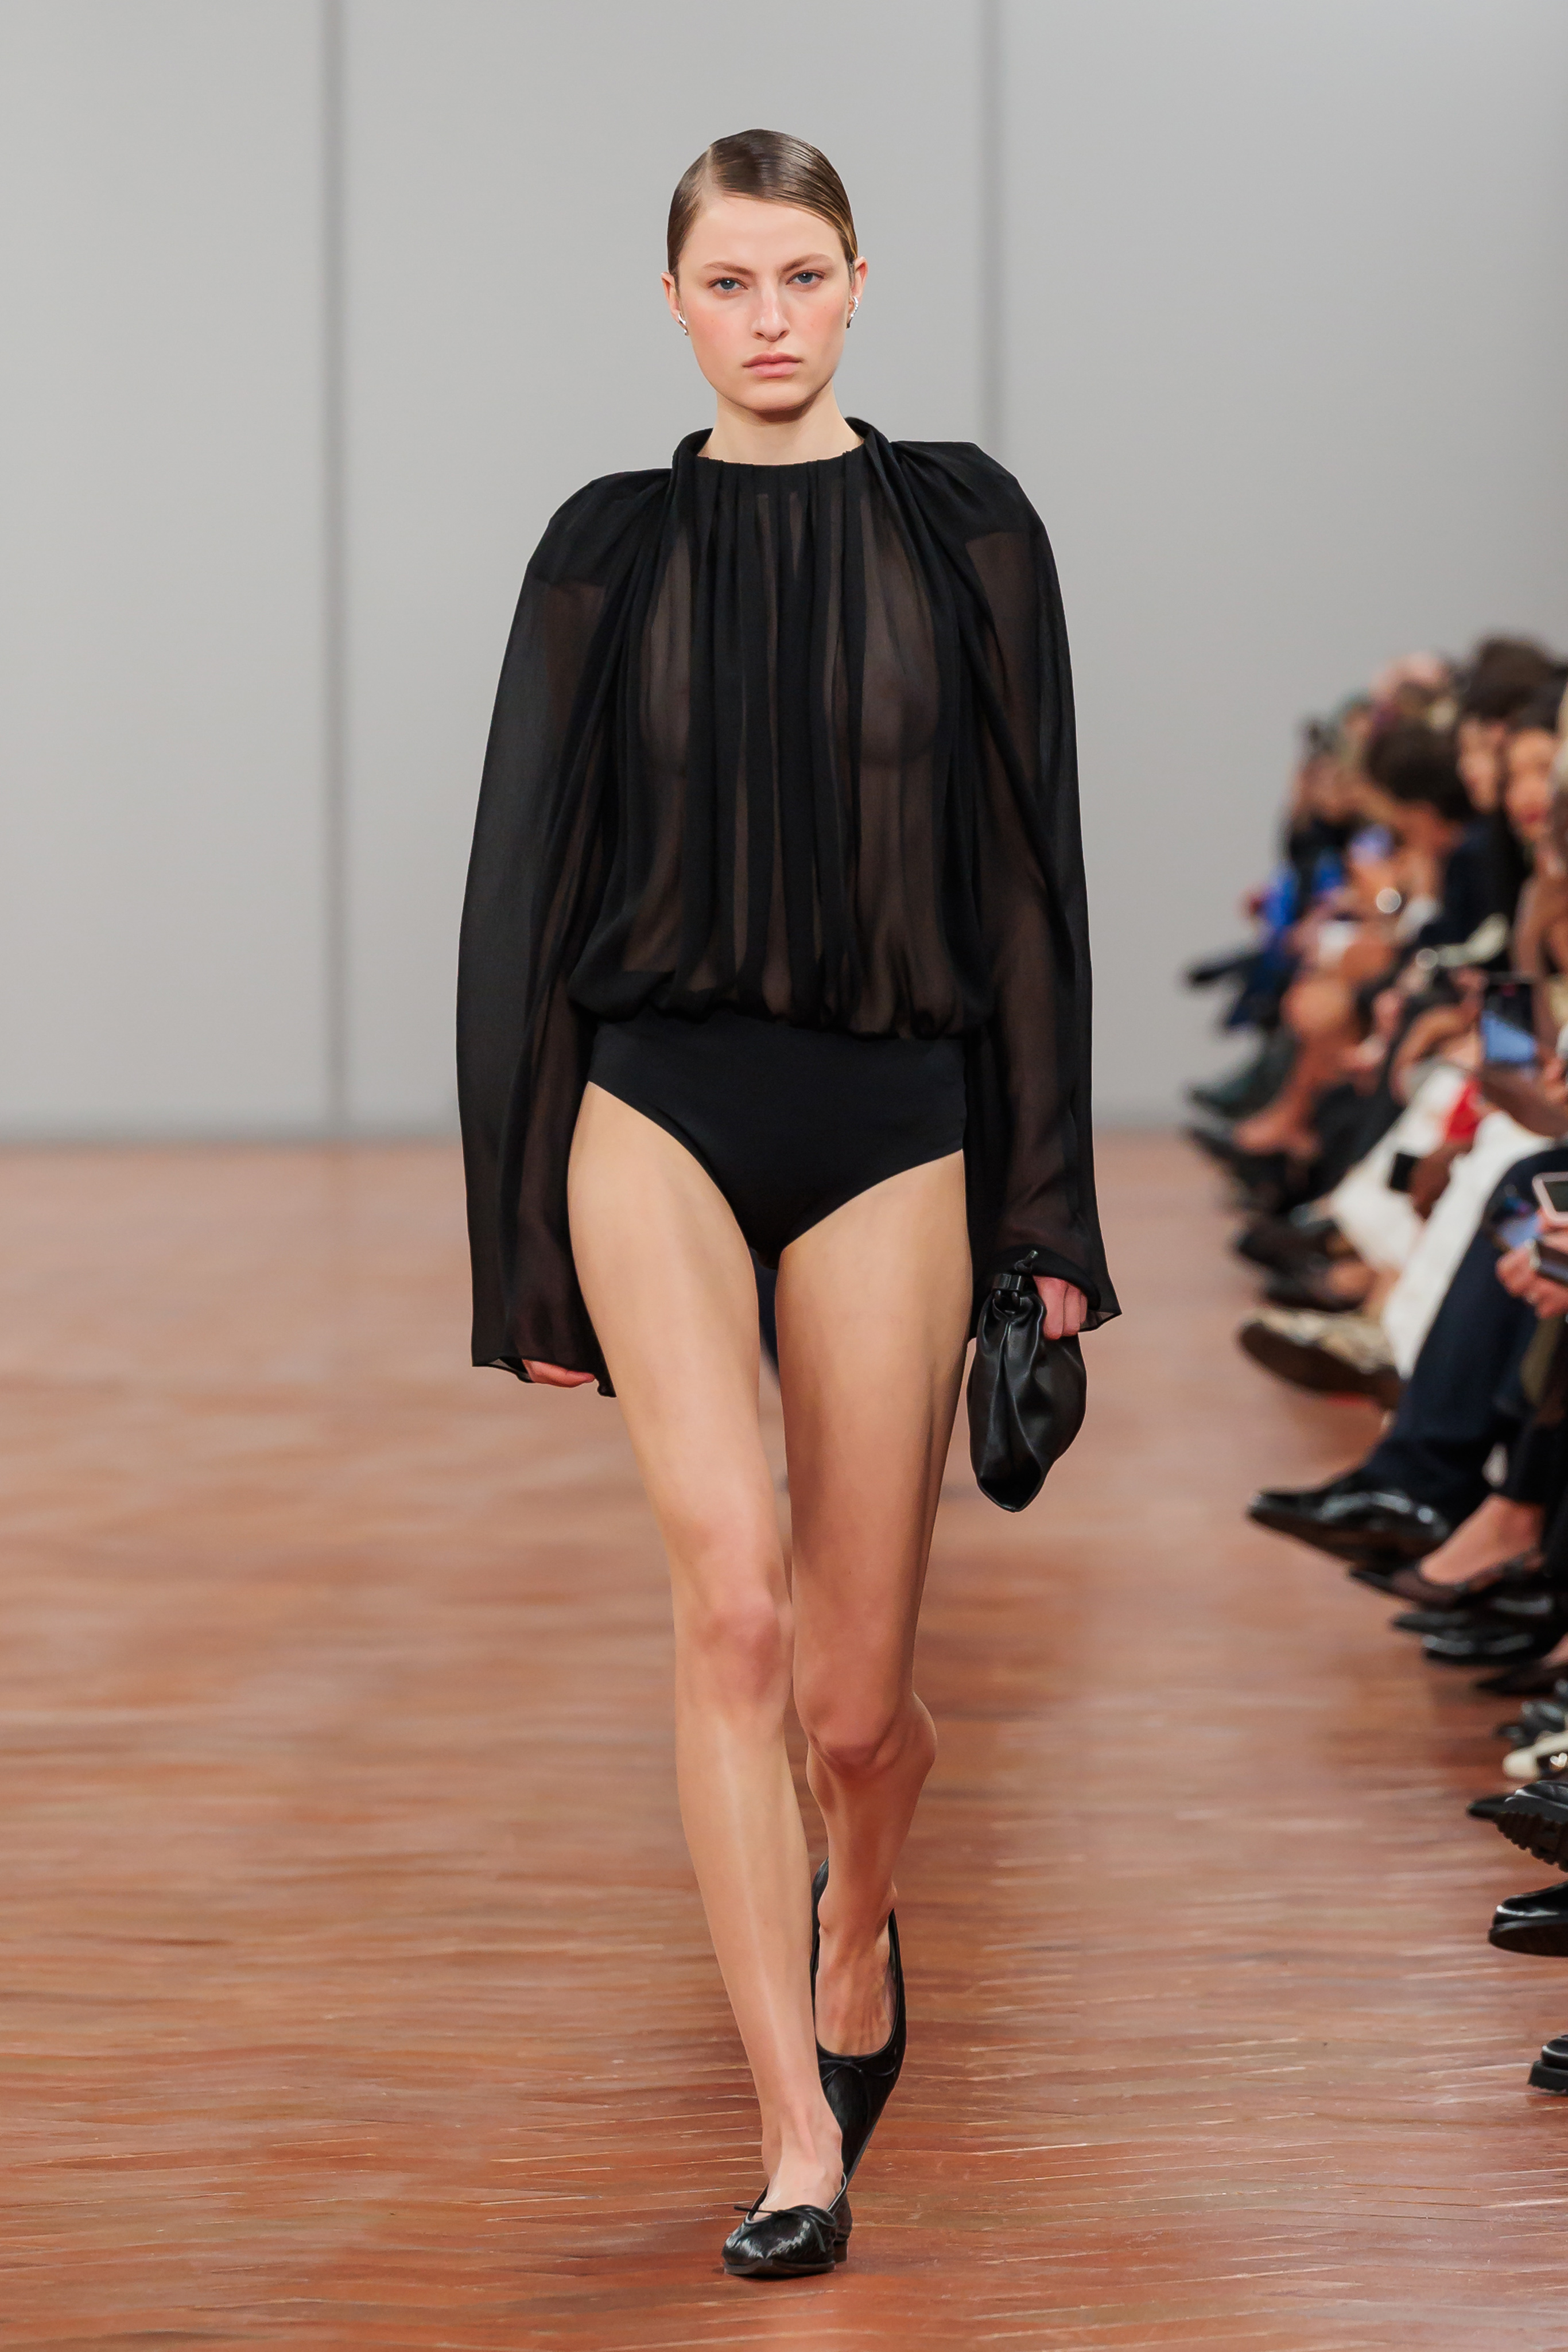 Model on runway wearing a sheer black blouse with billowing sleeves and black bottoms